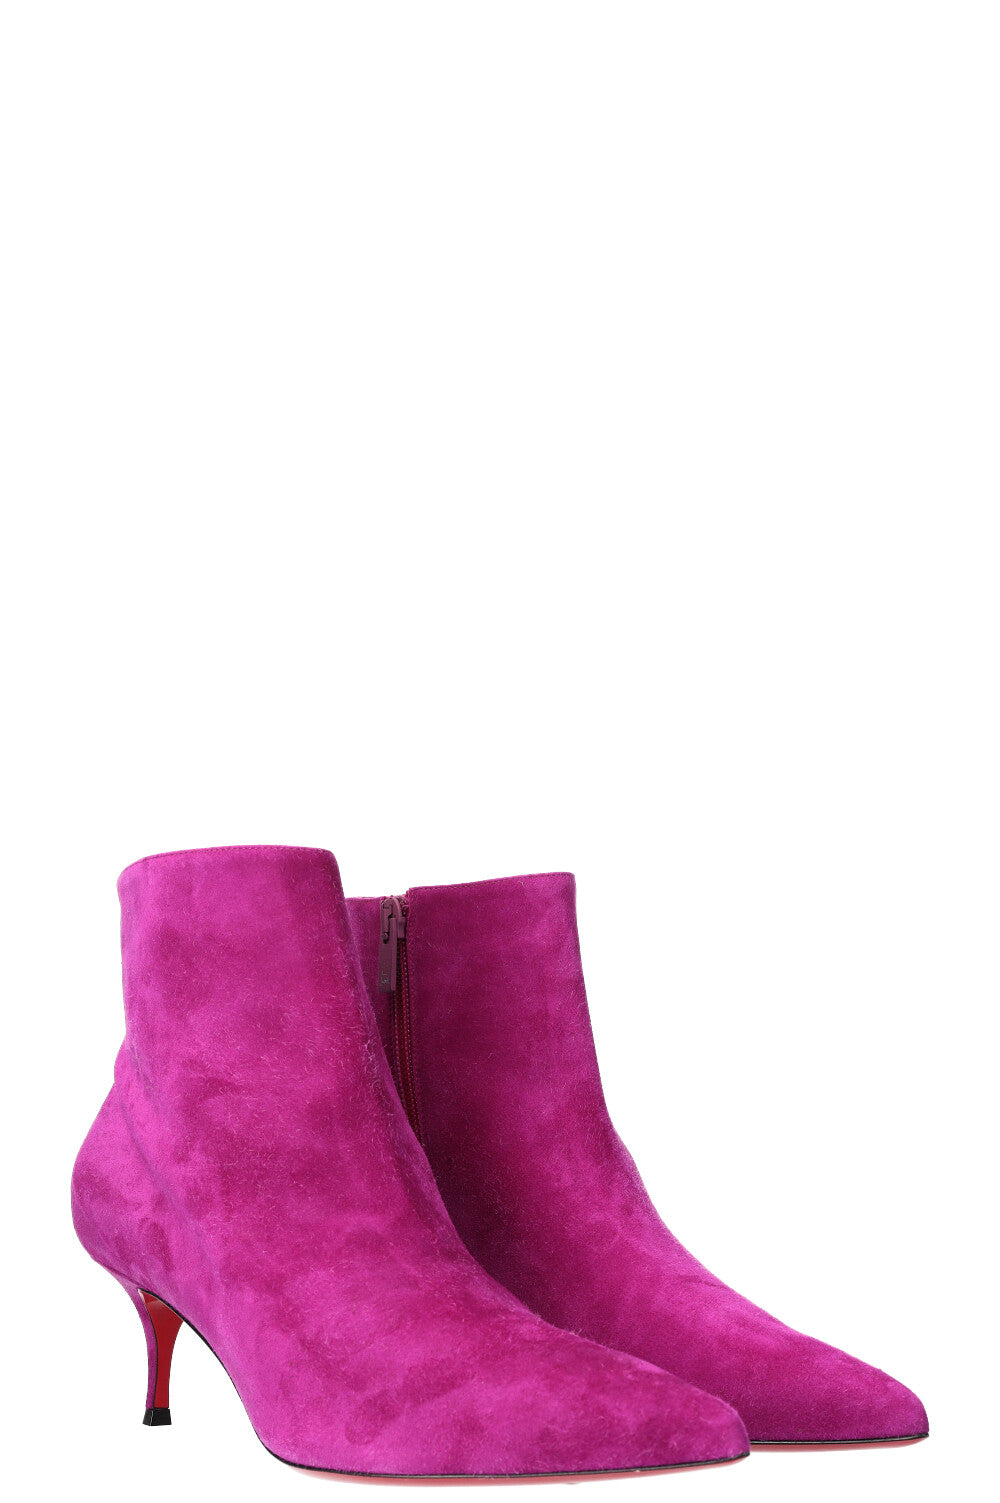 Christian Louboutin So Kate Boots 55 Suede Magenta